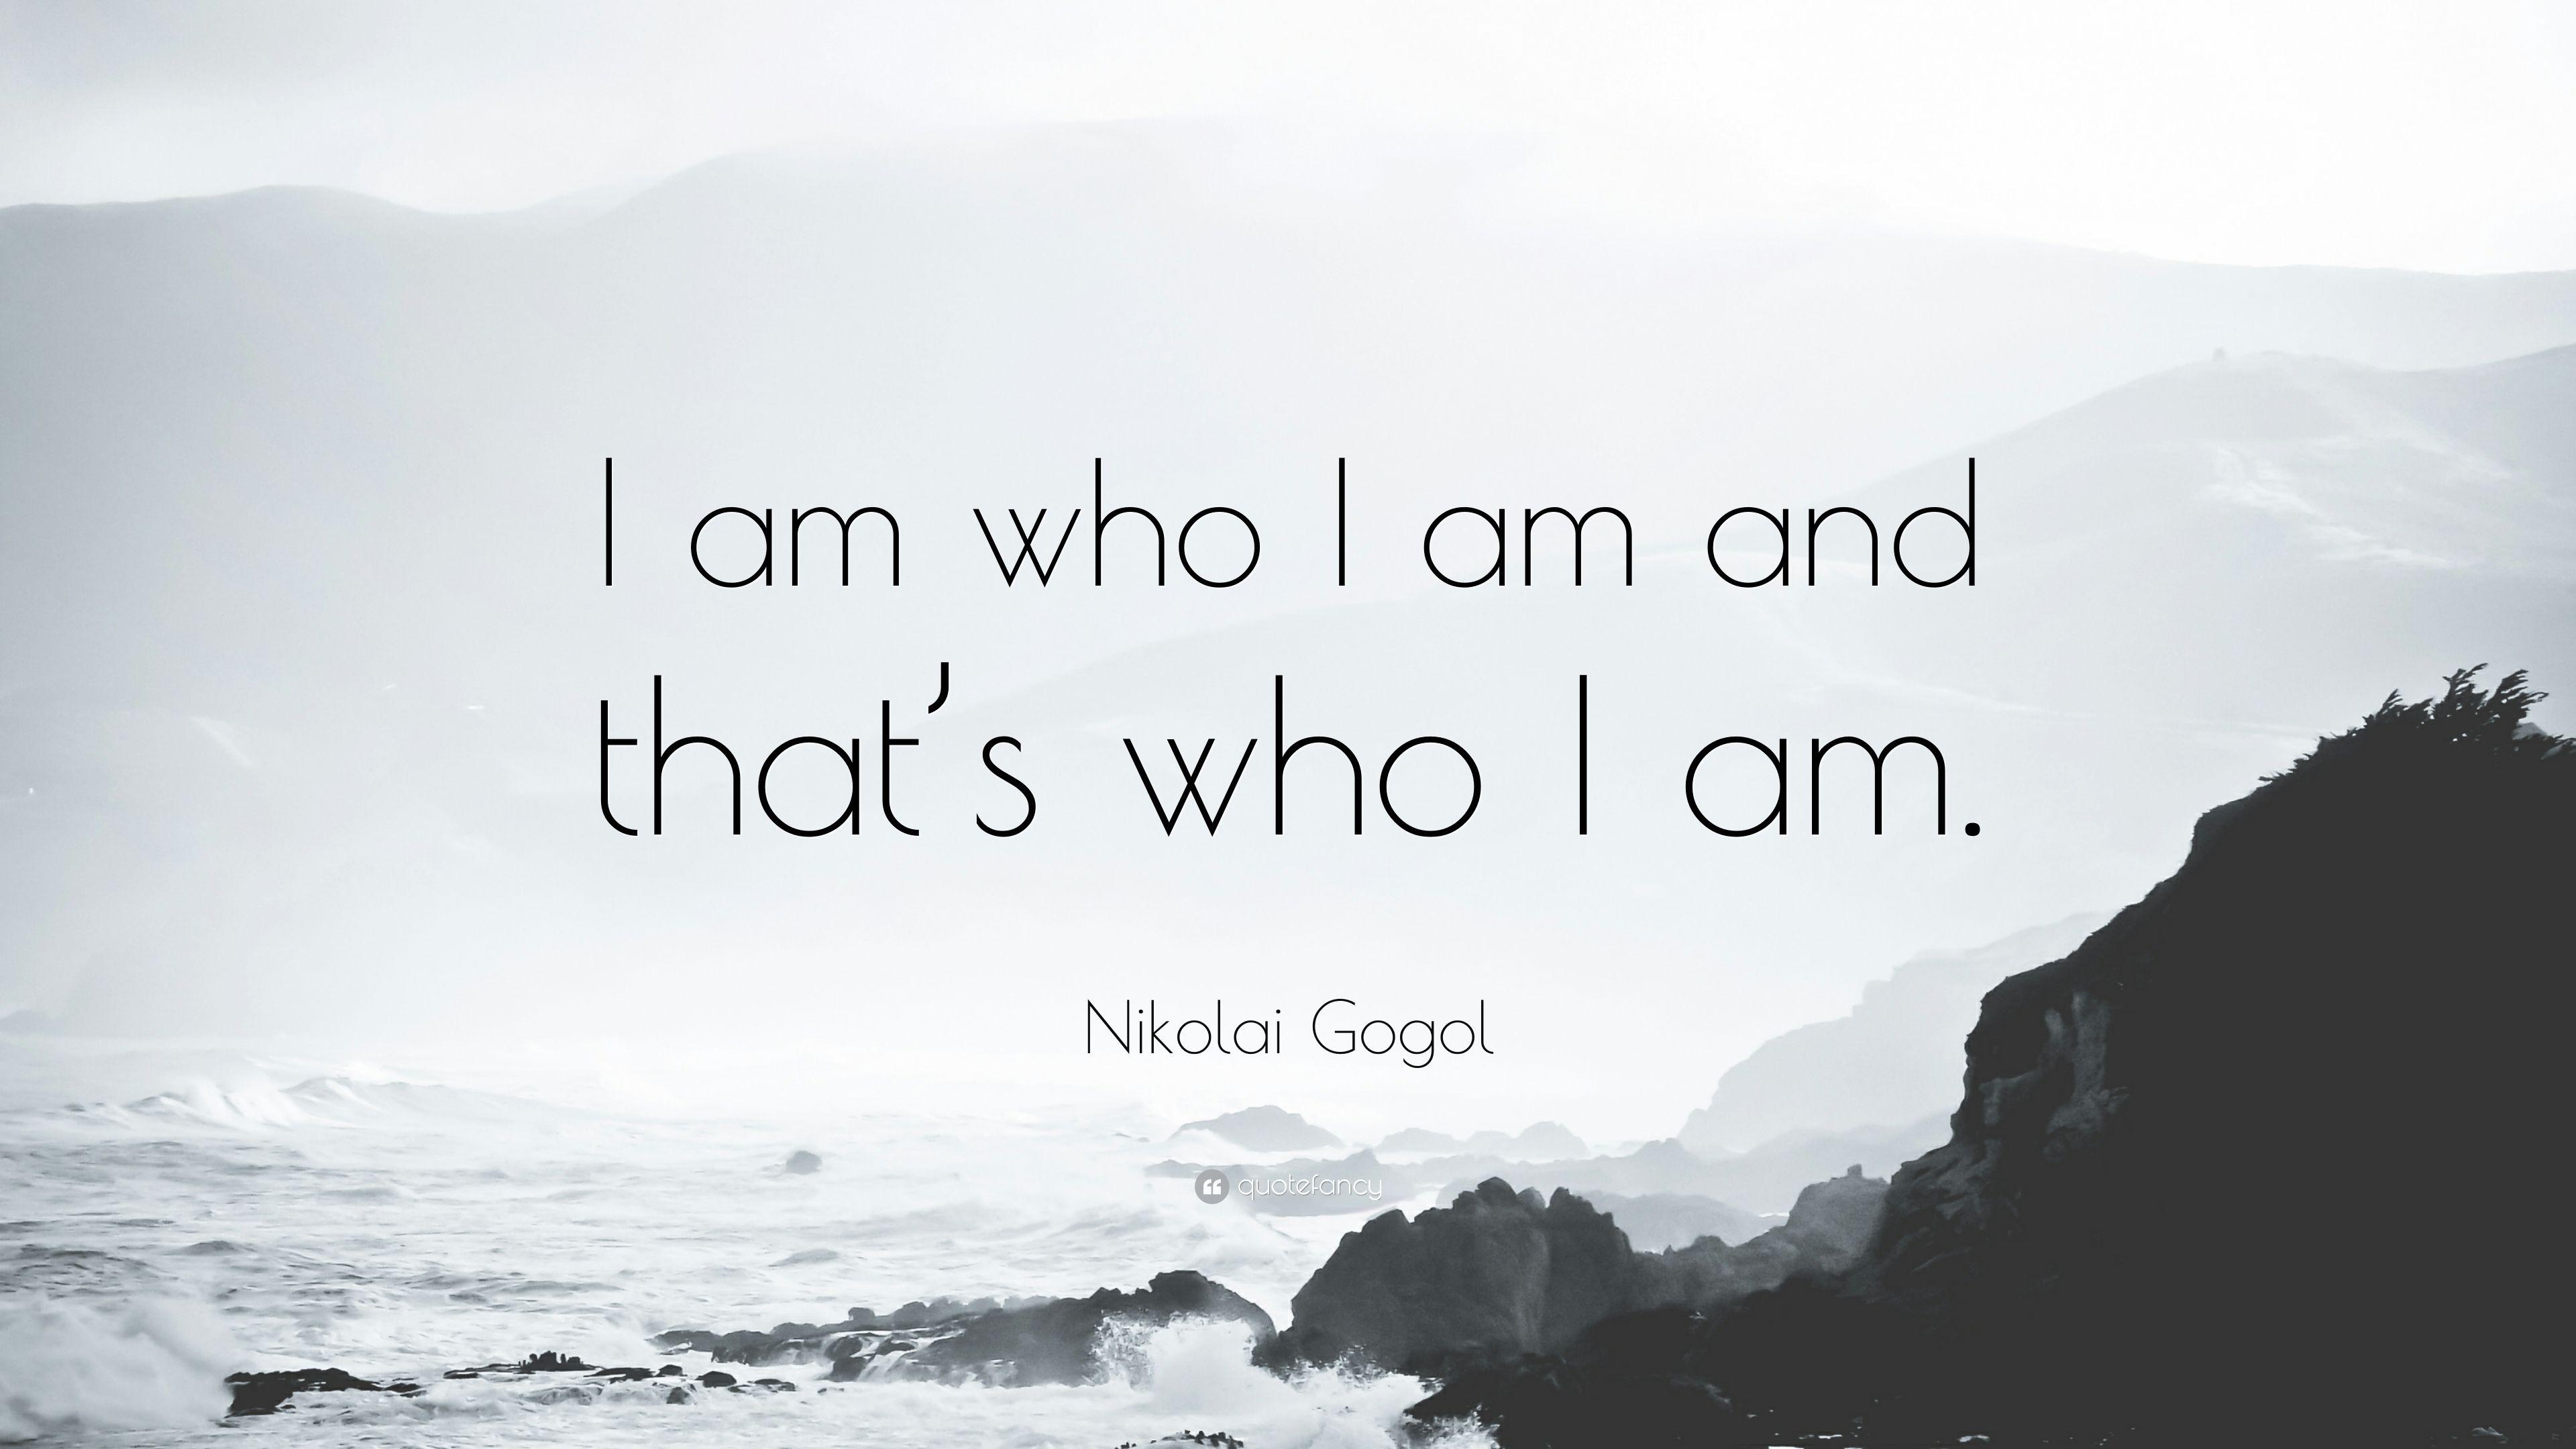 Nikolai Gogol Quote: “I am who I am and that's who I am.” 12